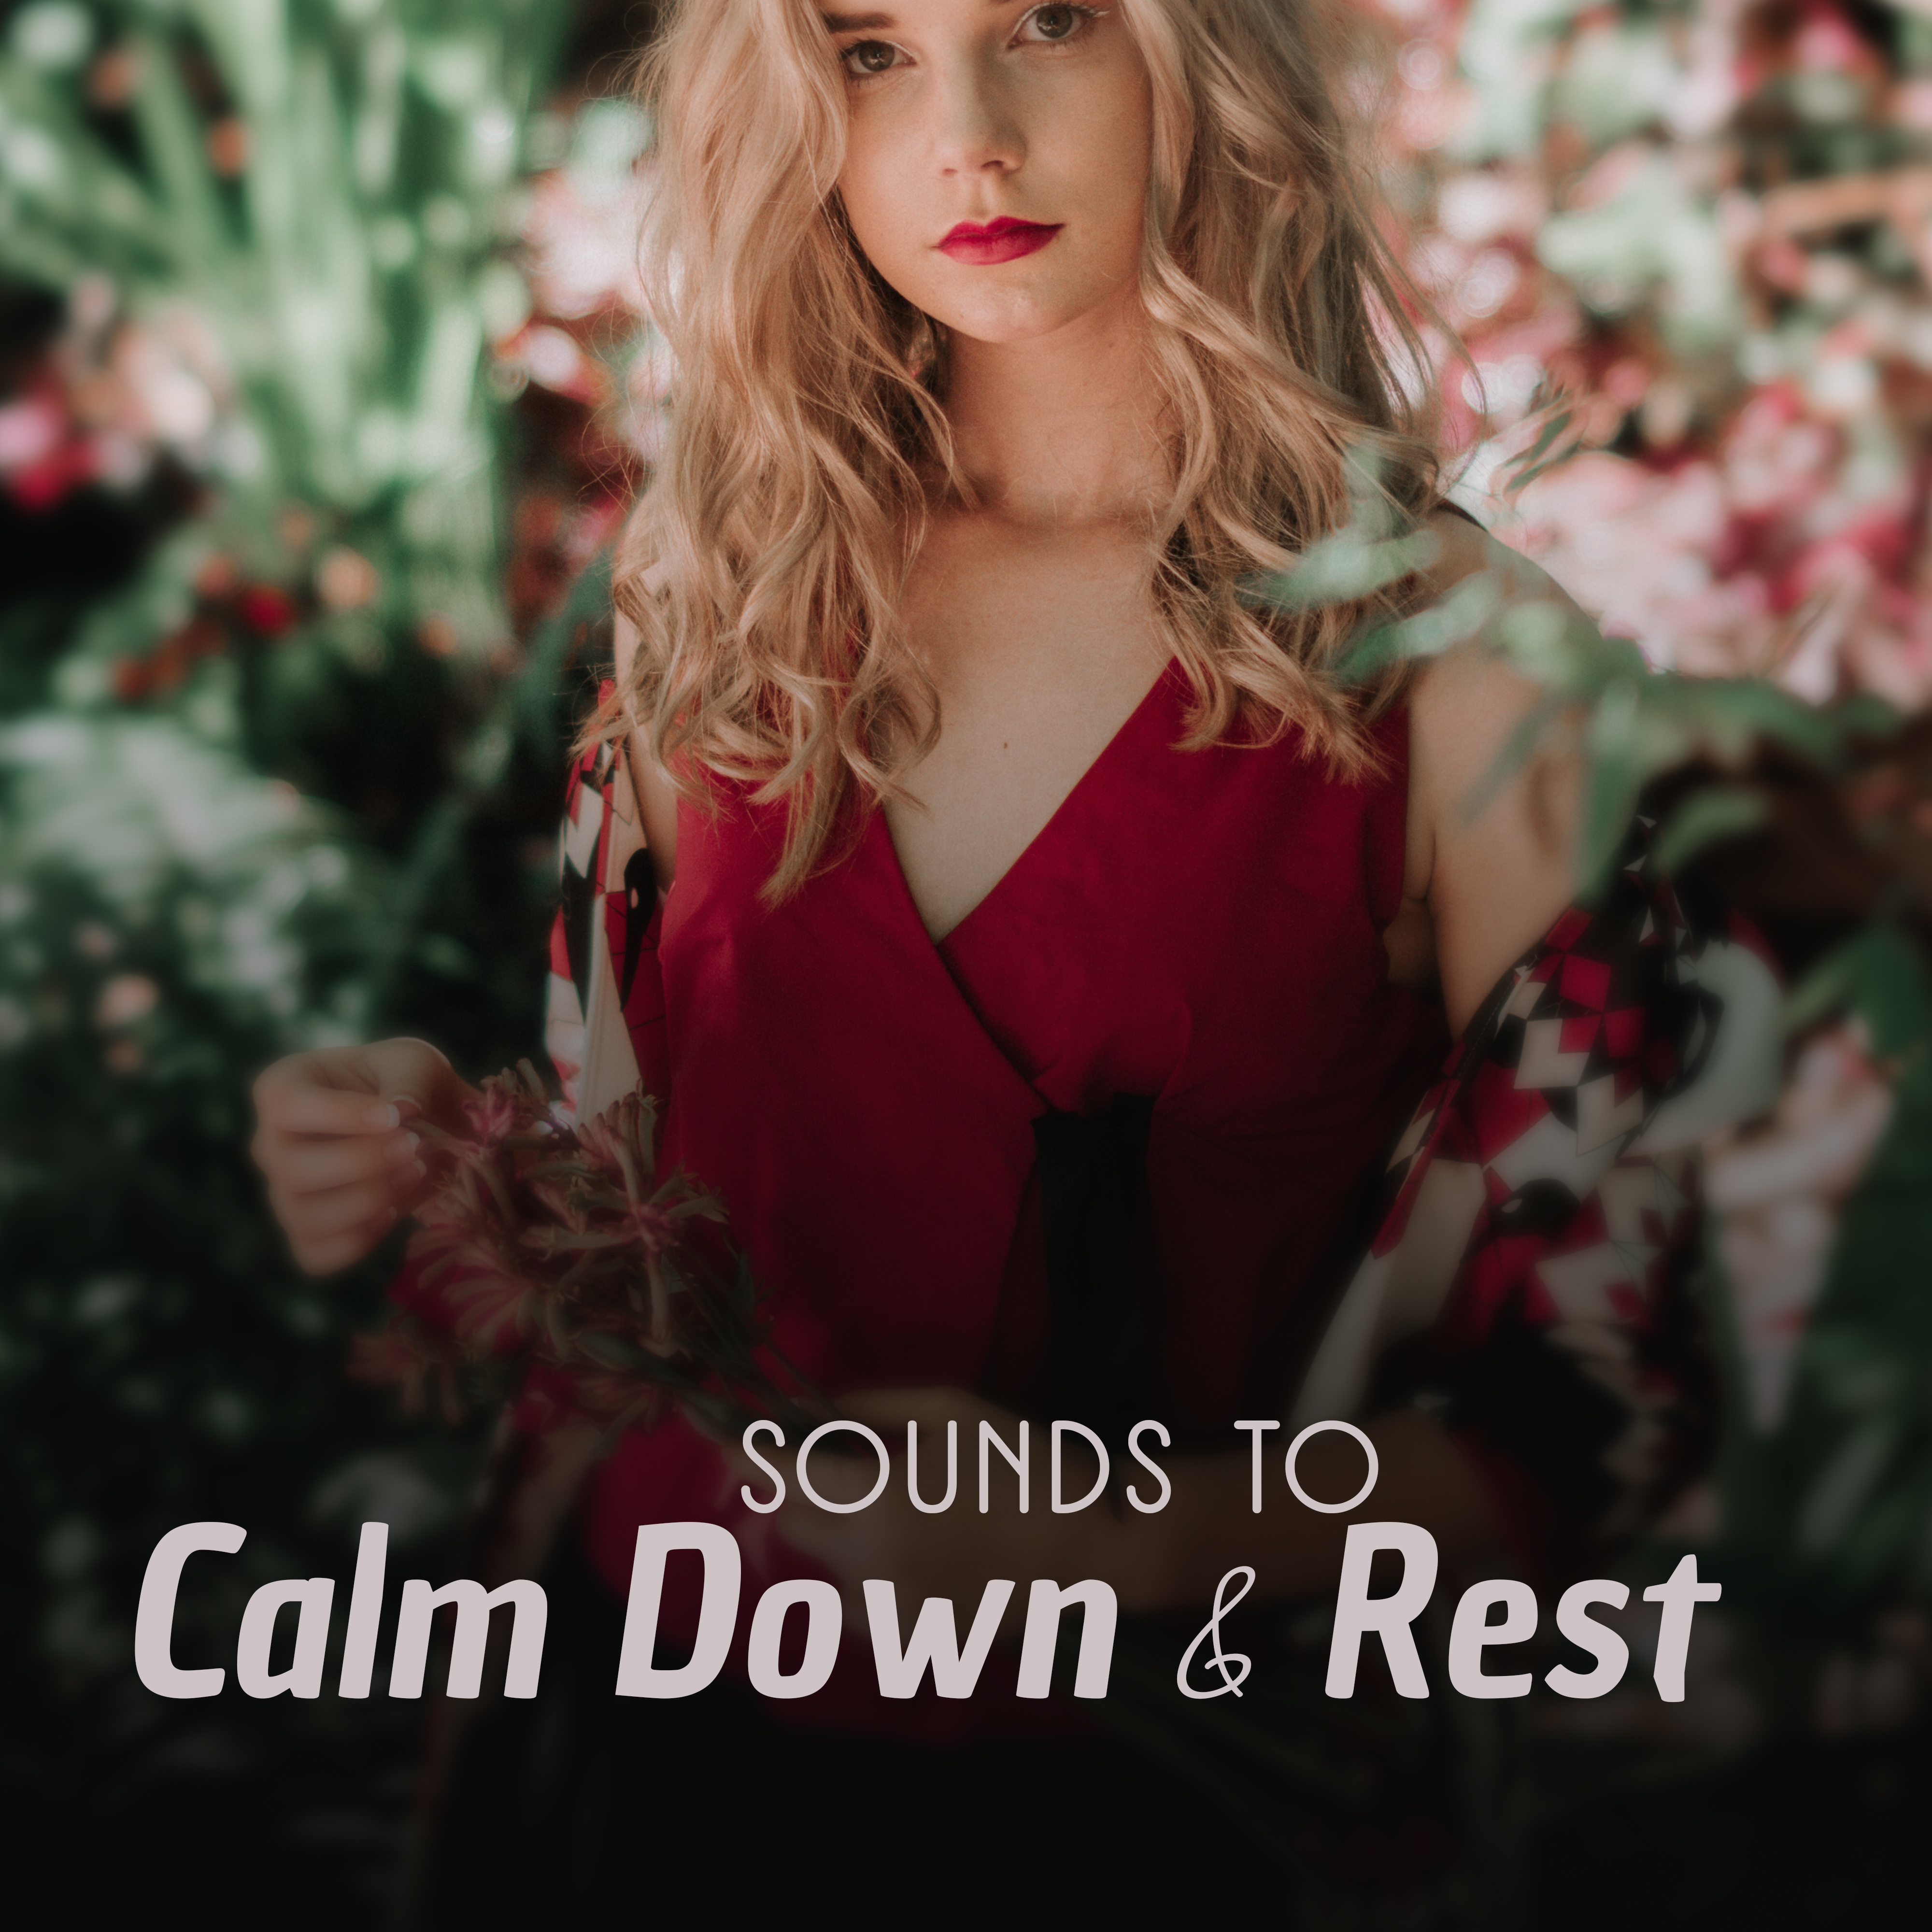 Sounds to Calm Down  Rest  Easy Listening, New Age Melodies to Relax, Peaceful Sounds for Mind Calmness, Body Relaxation